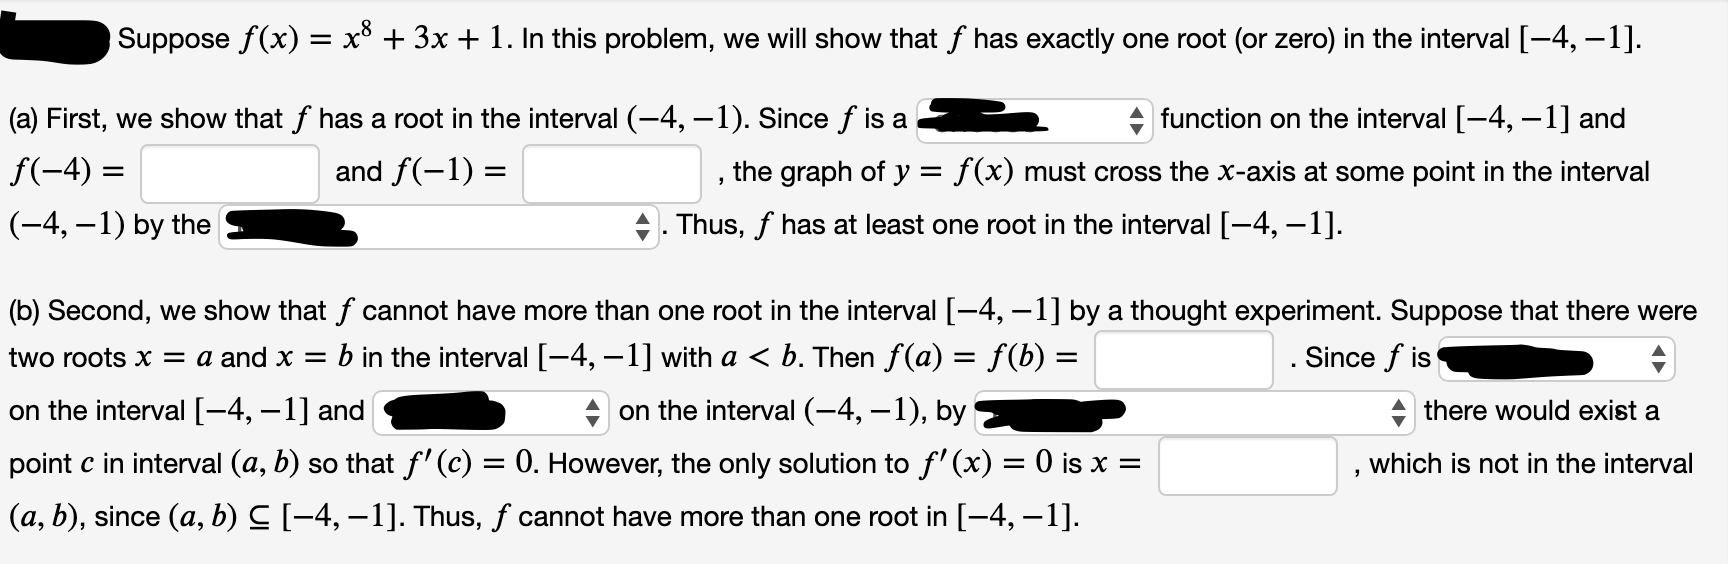 Suppose f(x) = x° + 3x + 1. In this problem, we will show that f has exactly one root (or zero) in the interval [-4, –1].
[-
a) First, we show that f has a root in the interval (-4, –1). Since f is a
f(-4) =
function on the interval [-4, -1] and
the graph of y = f(x) must cross the x-axis at some point in the interval
Thus, f has at least one root in the interval [-4, –1].
and f(-1) =
(-4, –1) by the
(b) Second, we show that f cannot have more than one root in the interval [-4, –1] by a thought experiment. Suppose that there were
two roots = a and x =
b in the interval [-4, –1] with a < b. Then f(a) = f(b) =
on the interval (-4, –1), by
.Since f is
on the interval [-4, –1] and
there would exist a
point c in interval (a, b) so that f'(c) = 0. However, the only solution to f' (x) = 0 is x =
which is not in the interval
(a, b), since (a, b) C [-4, –1]. Thus, f cannot have more than one root in [-4, –1].
